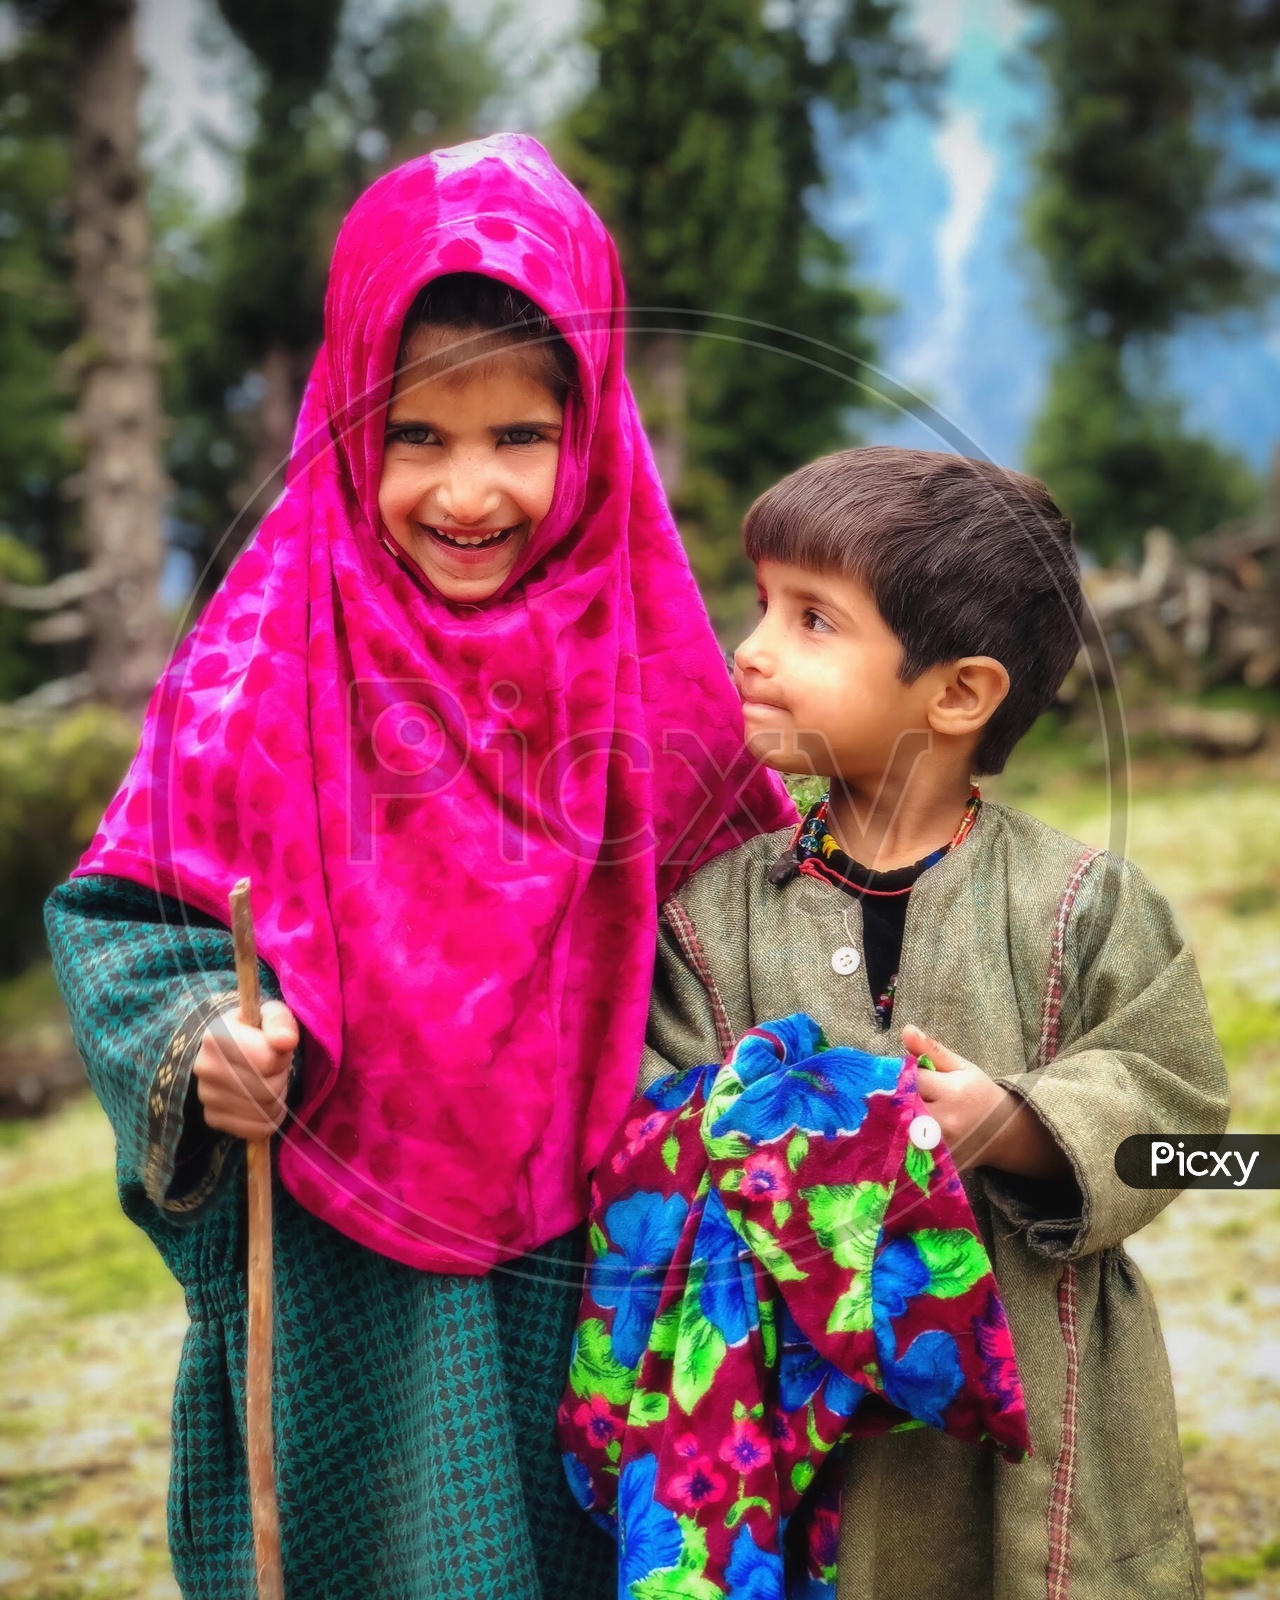 Innocent smiling  faces from kashmir valley